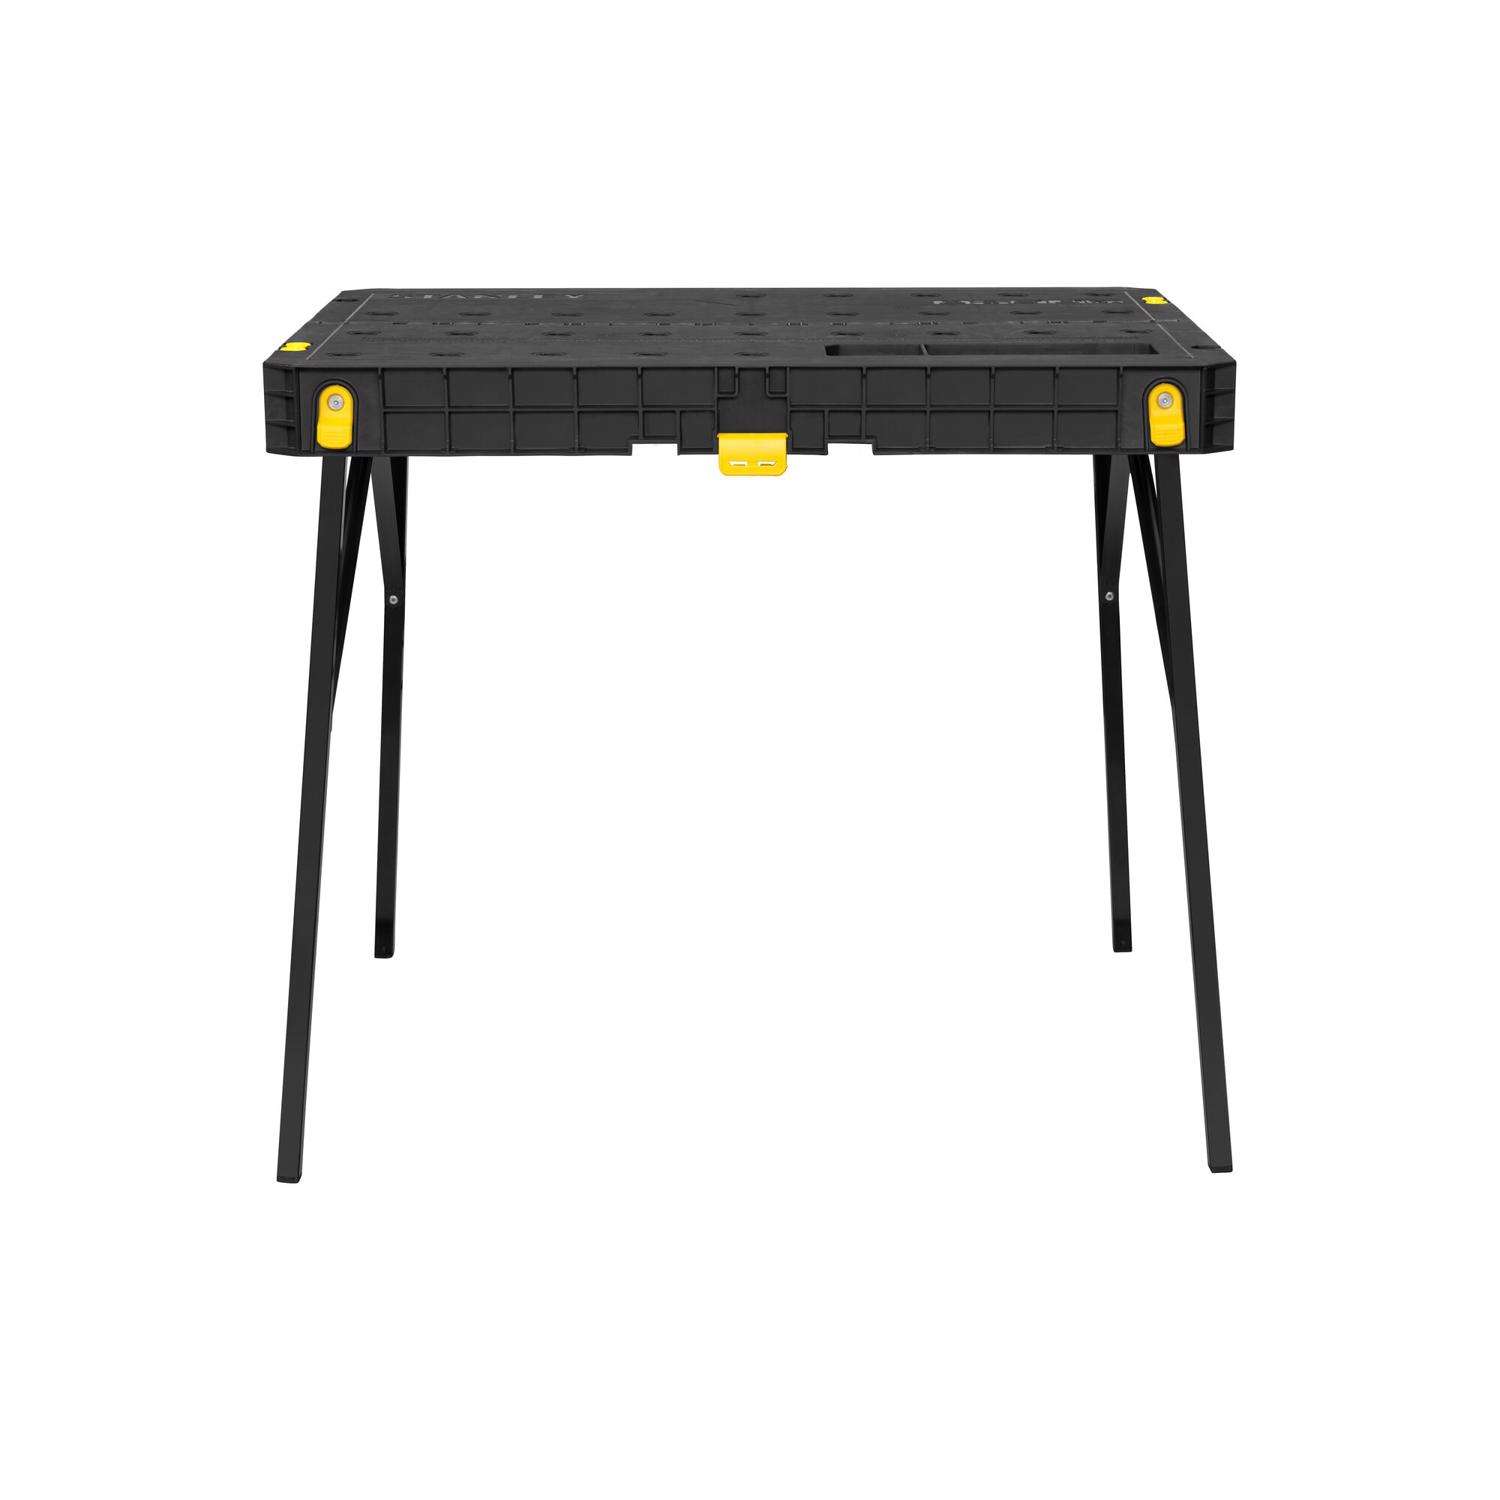 Cat: Foldable Workbench - Transportable Tool Shop